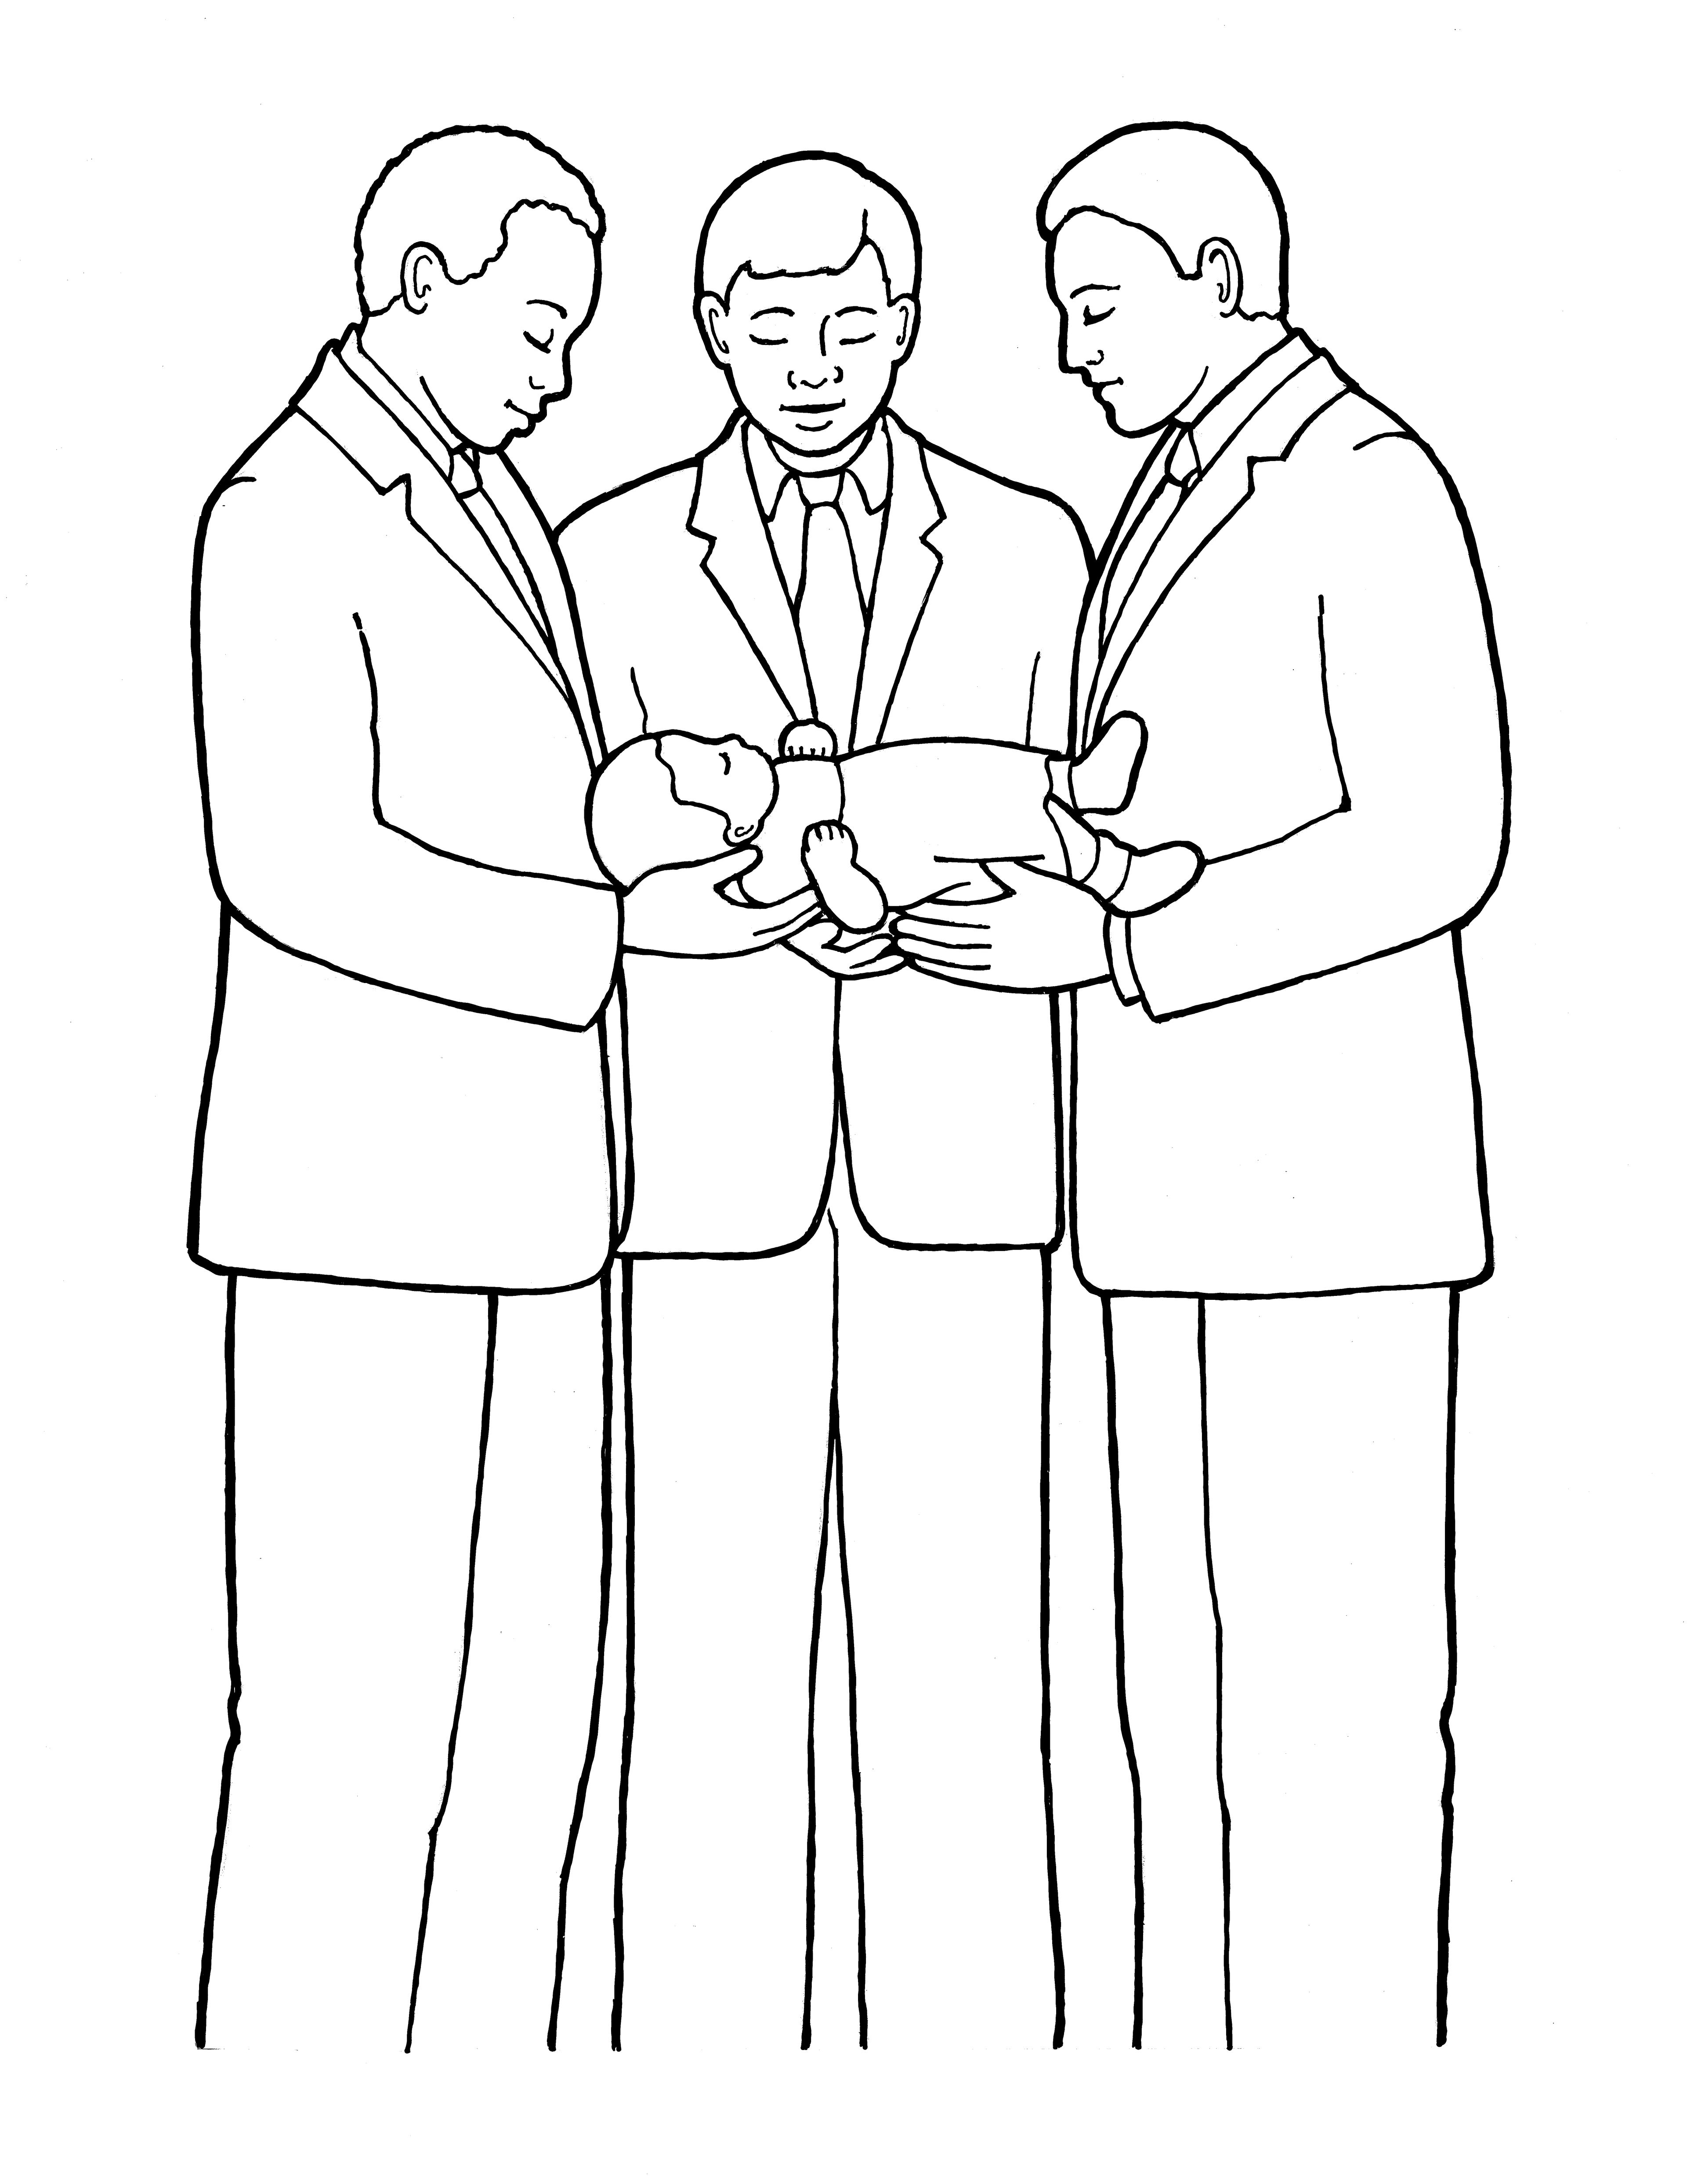 An illustration of three men blessing a small baby, from the nursery manual Behold Your Little Ones (2008), page 119.